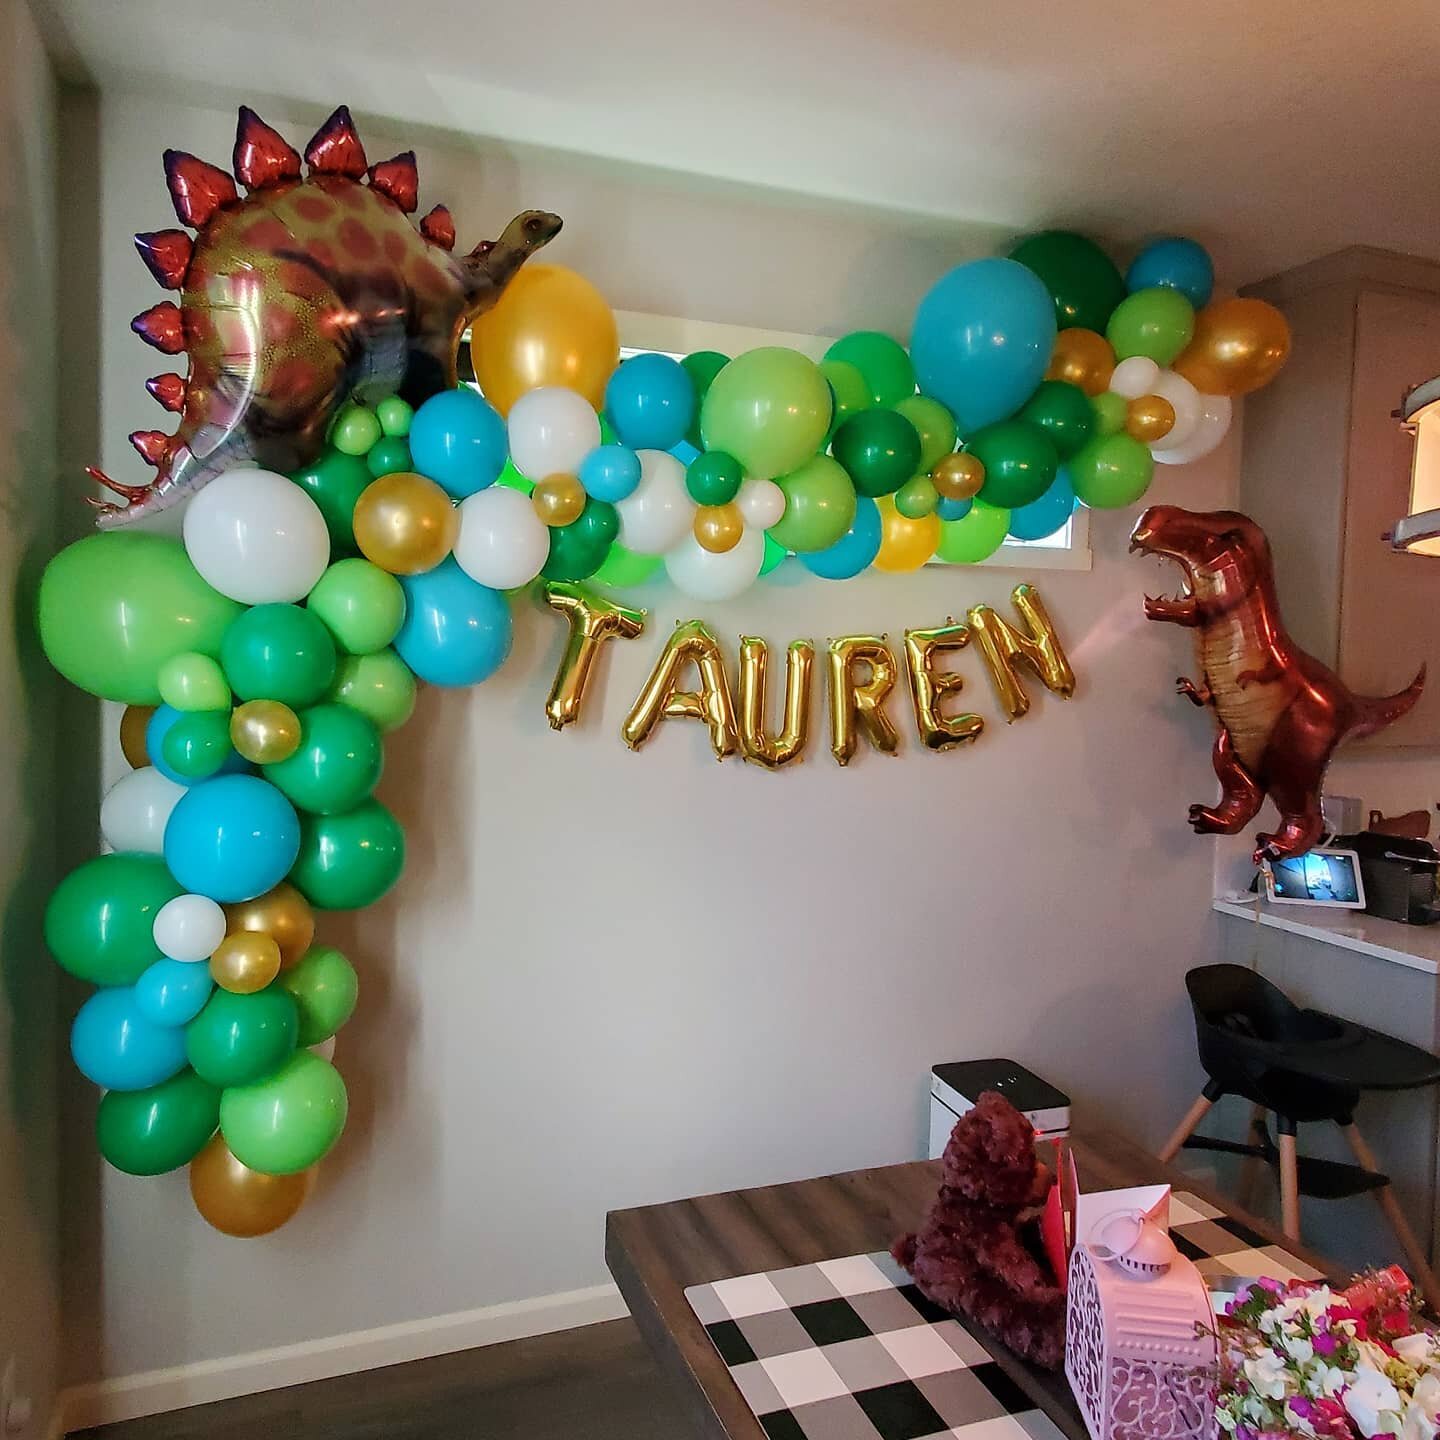 Created the cutest dino-themed garland the other day for a super cute family!!!

Happy 1st Birthday, Tauren! 🥳

#balloons #balloonsonbroadway #balloonsportland #balloonspdx #pdxballoons #portlandballoons #balloondecor #decor #creative #balloonsculpt